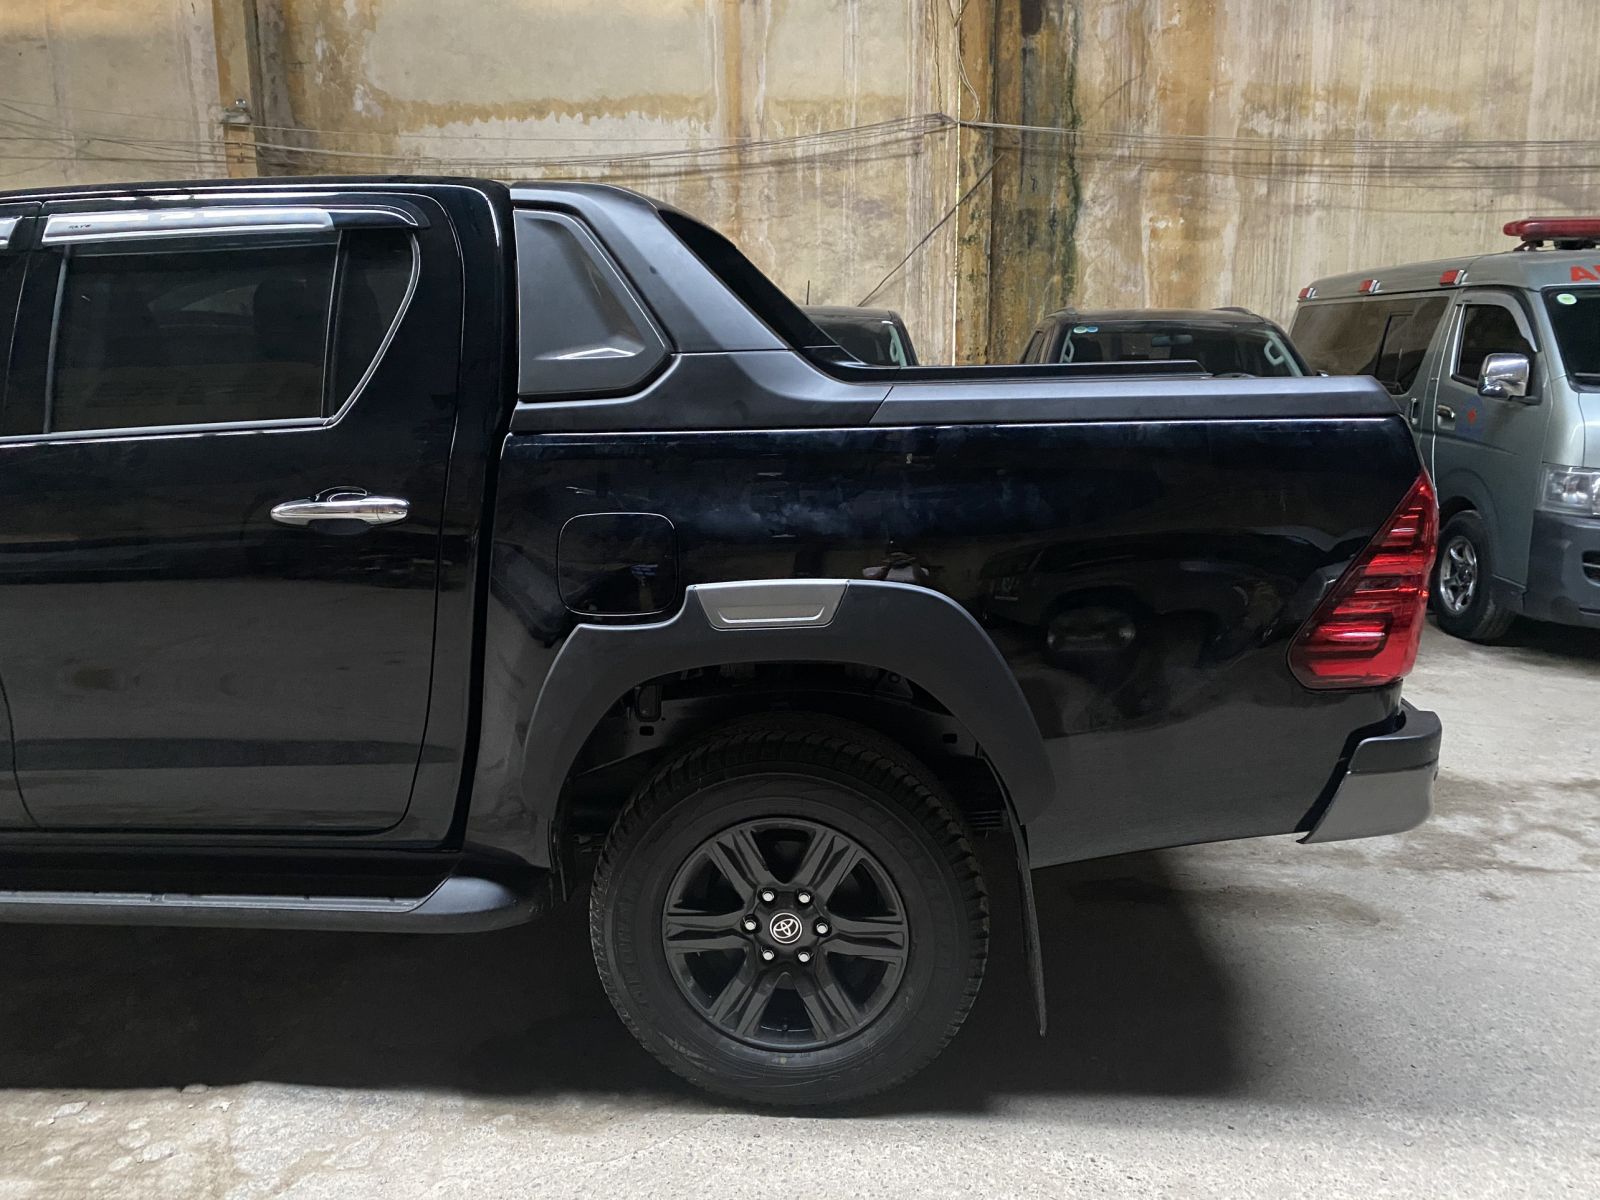 Thanh thể thao Hilux 2021